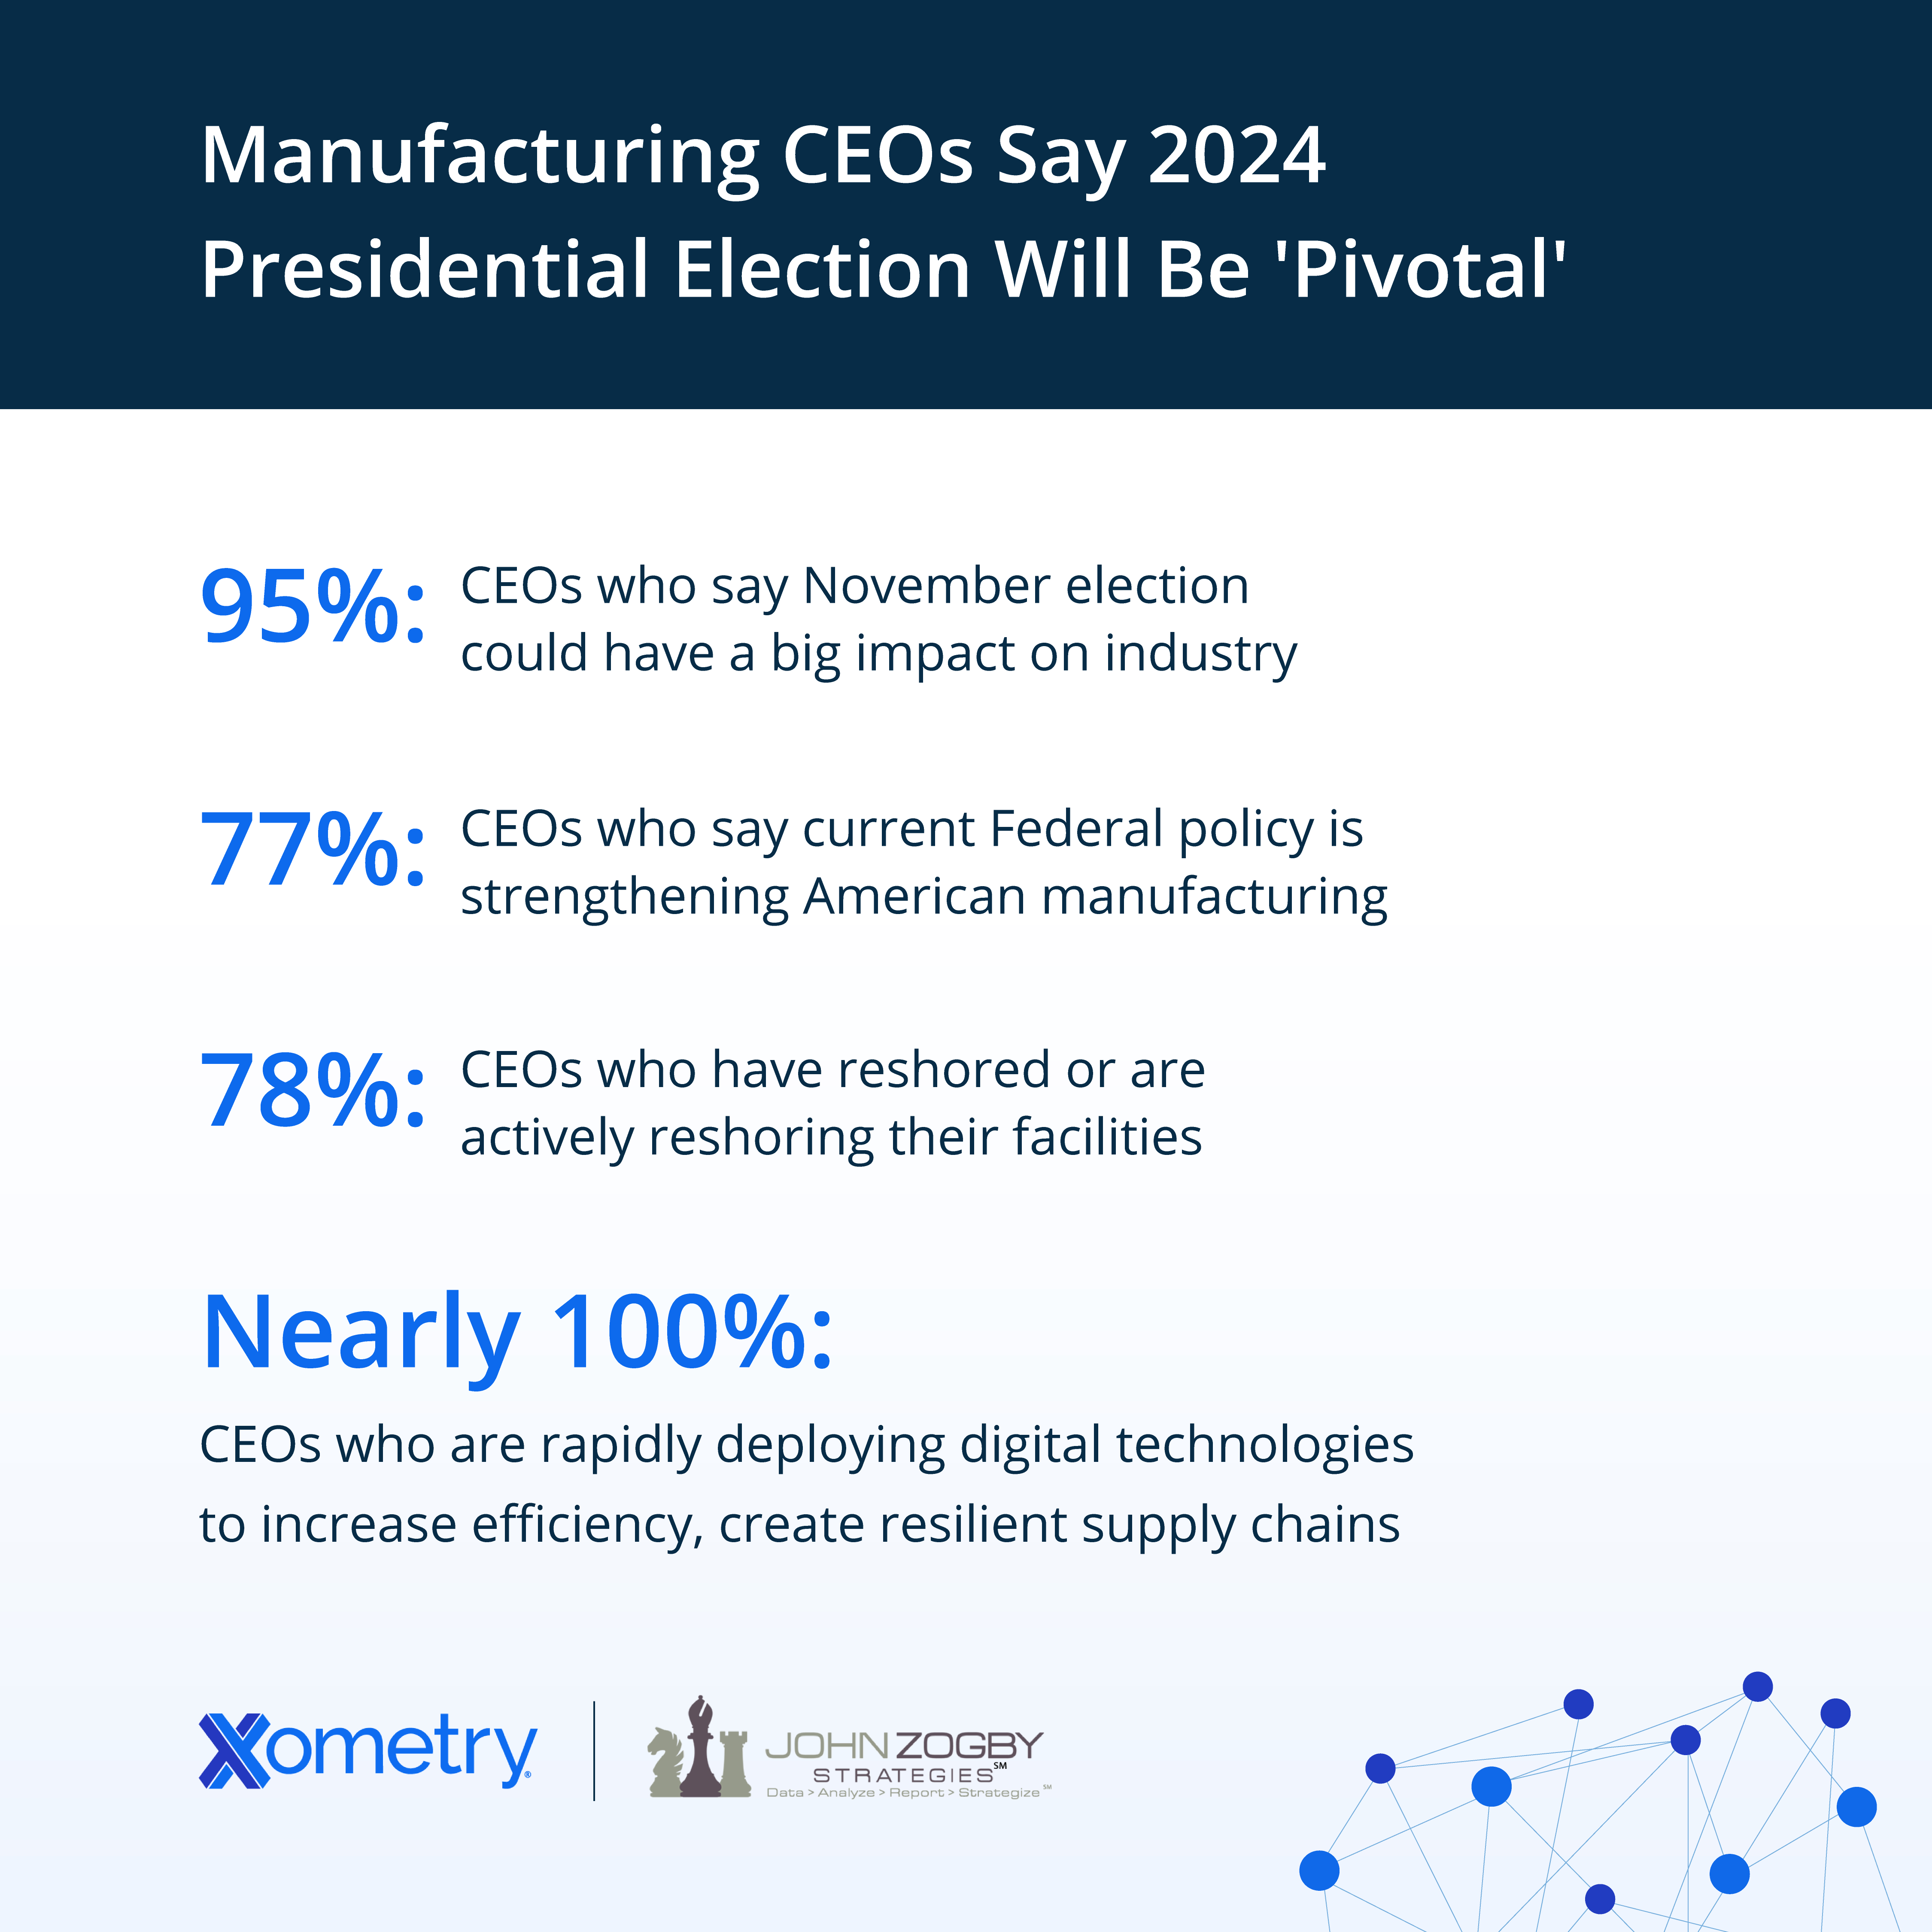 Manufacturing CEOs Say 2024 Presidential Election Will Be ‘Pivotal,’ New ‘American Manufacturing Resilience’ Survey From Zogby Strategies And Xometry 